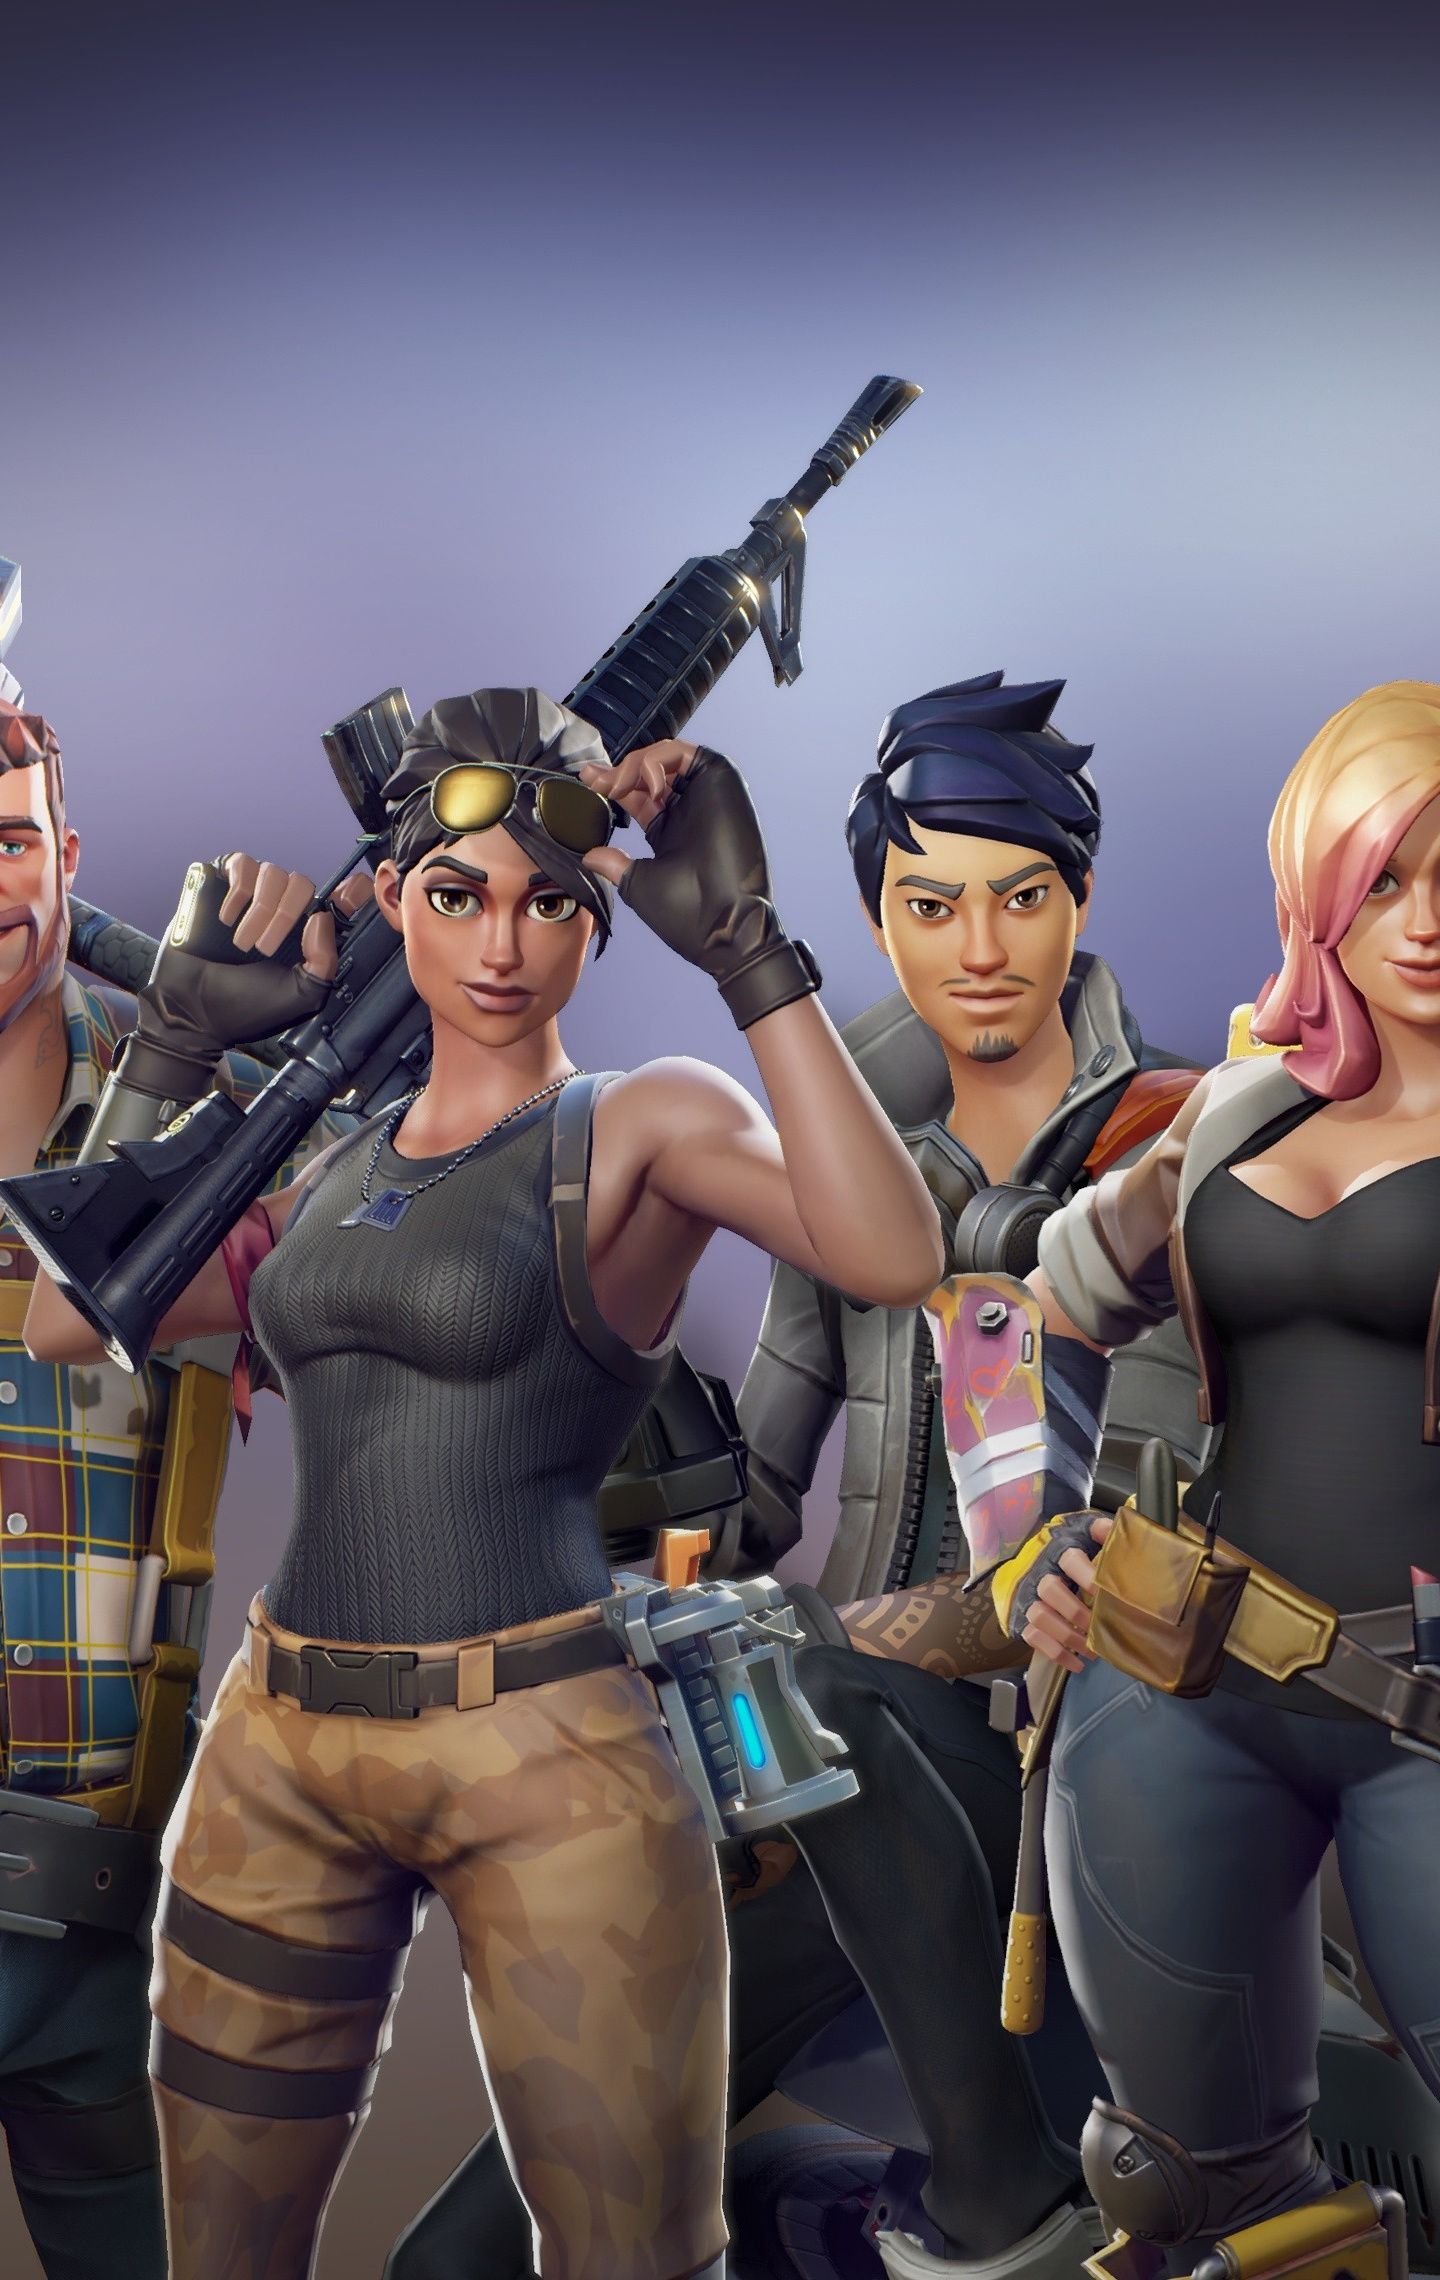 Download 1440x2960 wallpaper all characters, video game, fortnite